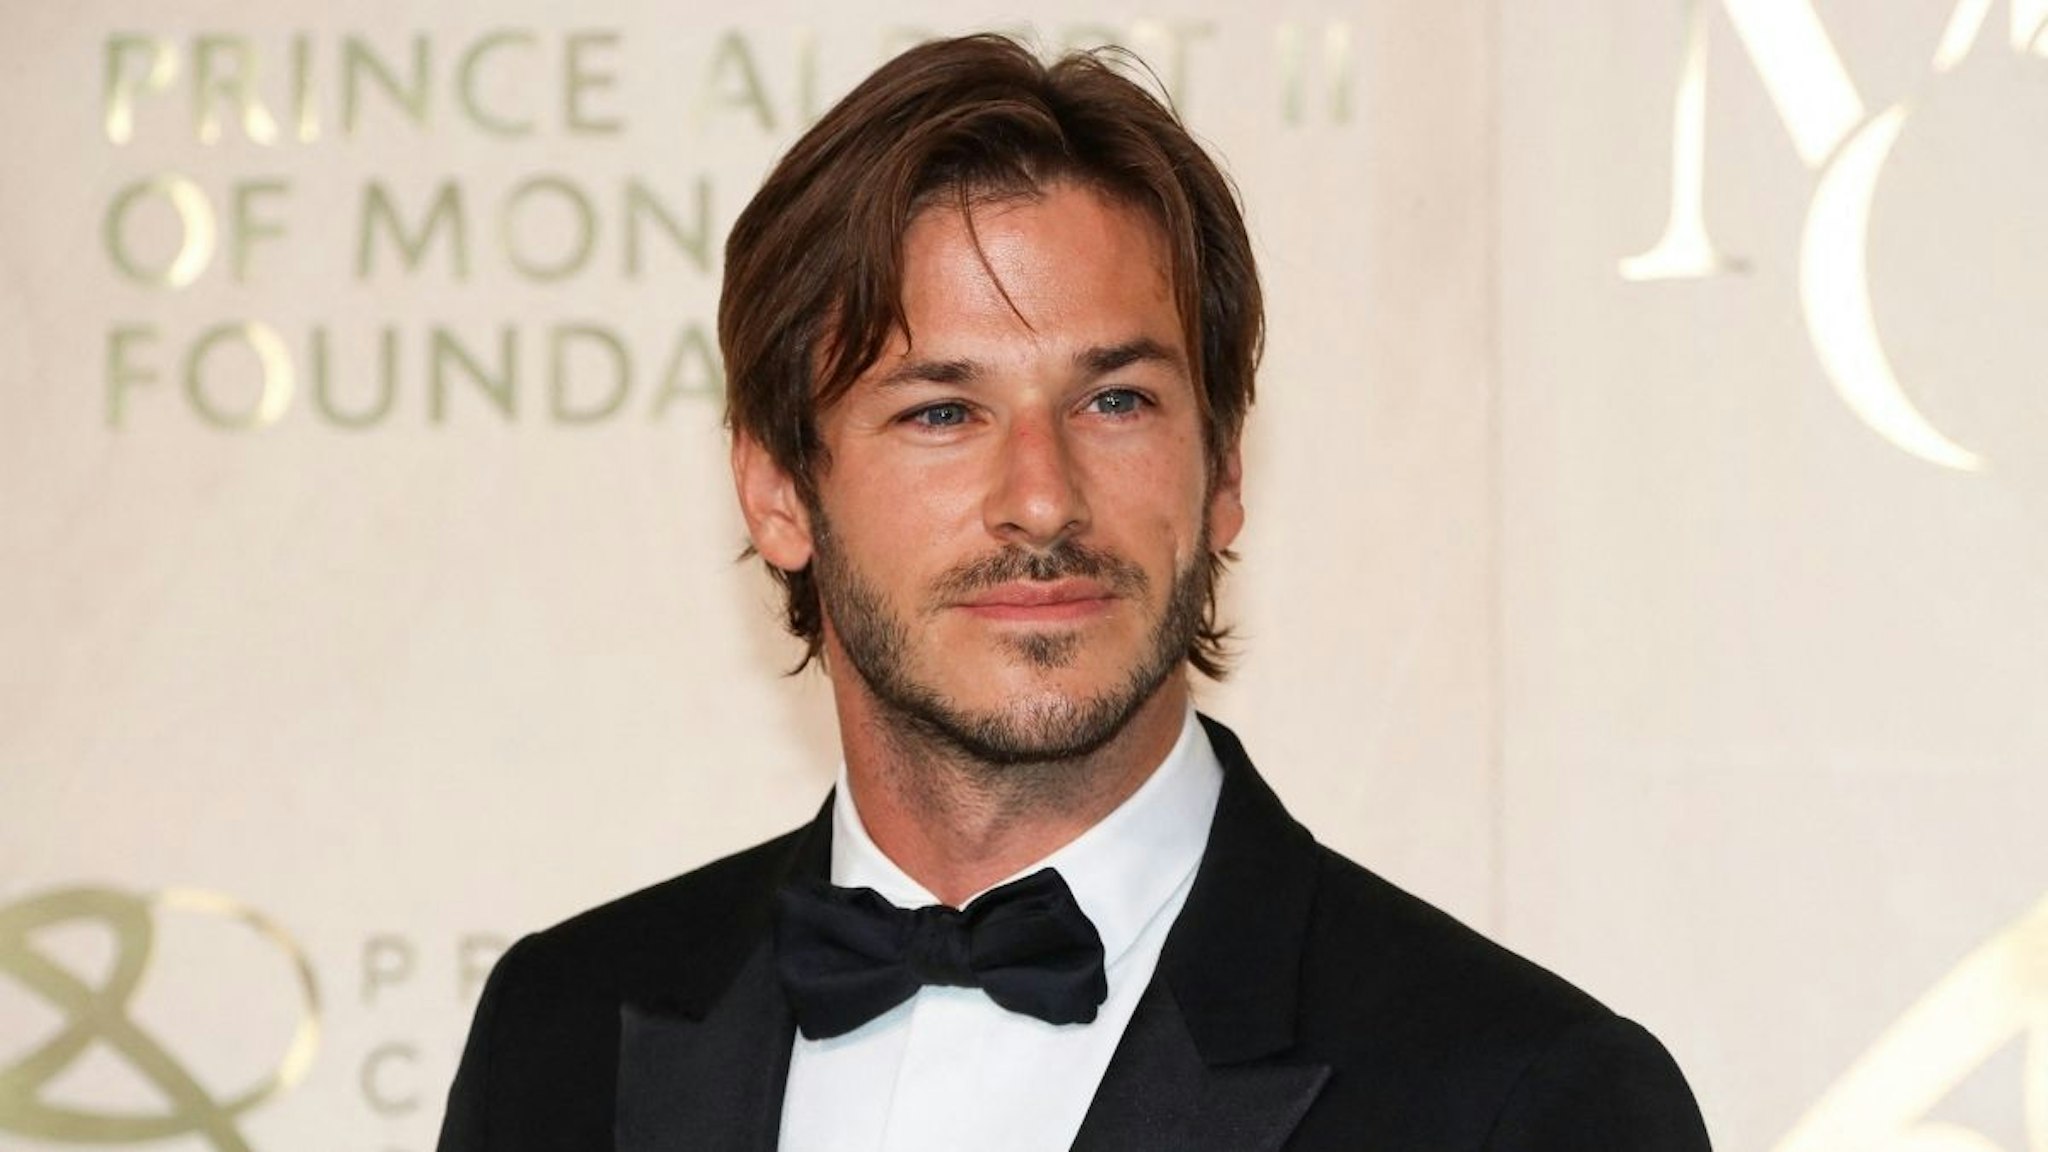 French actor Gaspard Ulliel poses during the photocall ahead of the 2021 Monte-Carlo Gala for Planetary Health at the Palais de Monaco, in Monaco, on September 23, 2021.